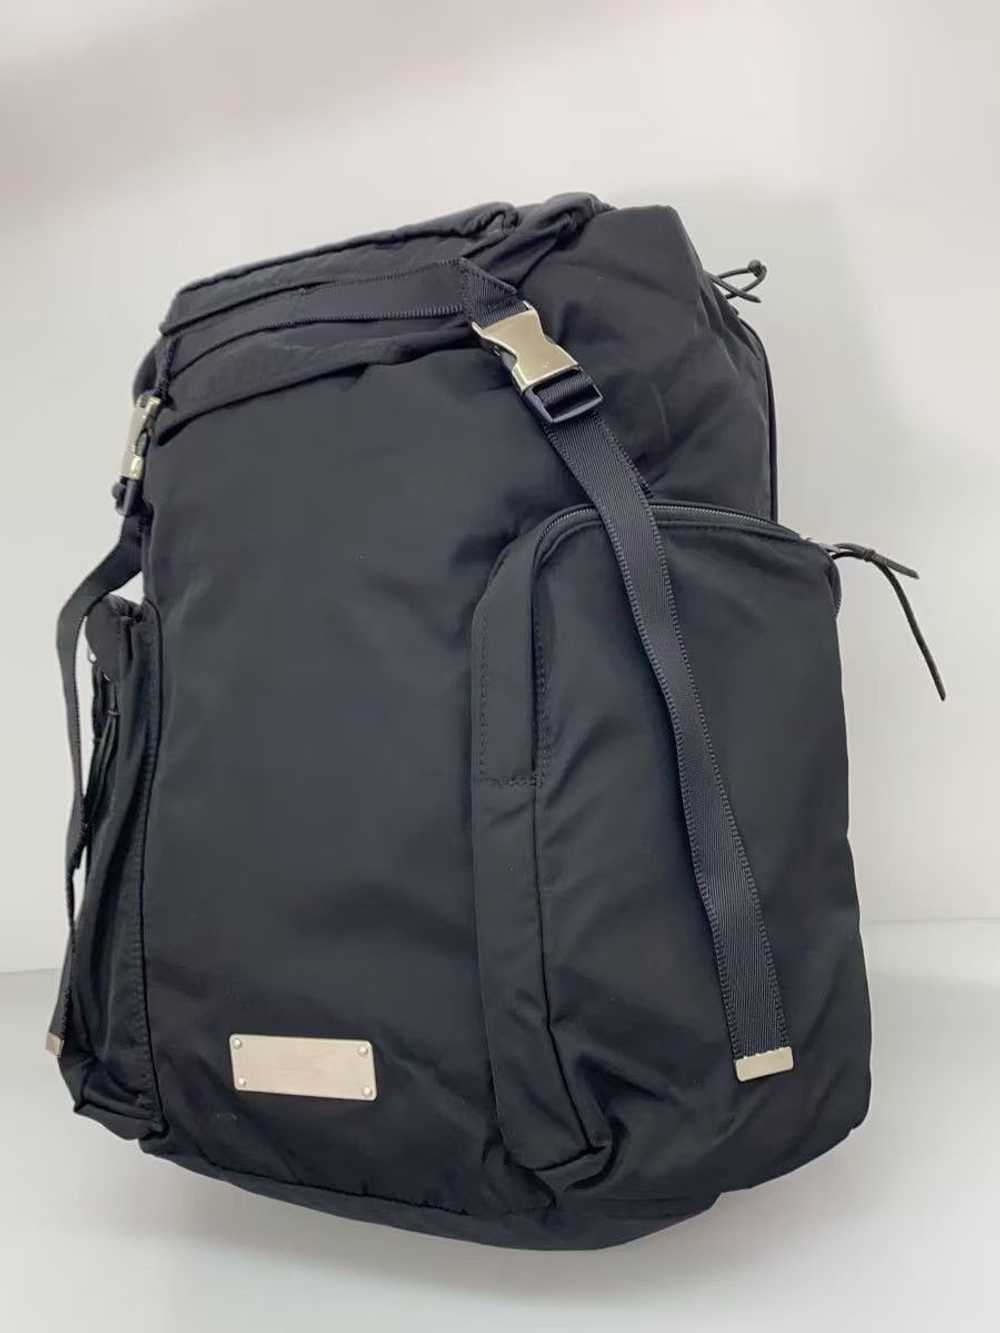 Undercover Utility Backpack - image 2